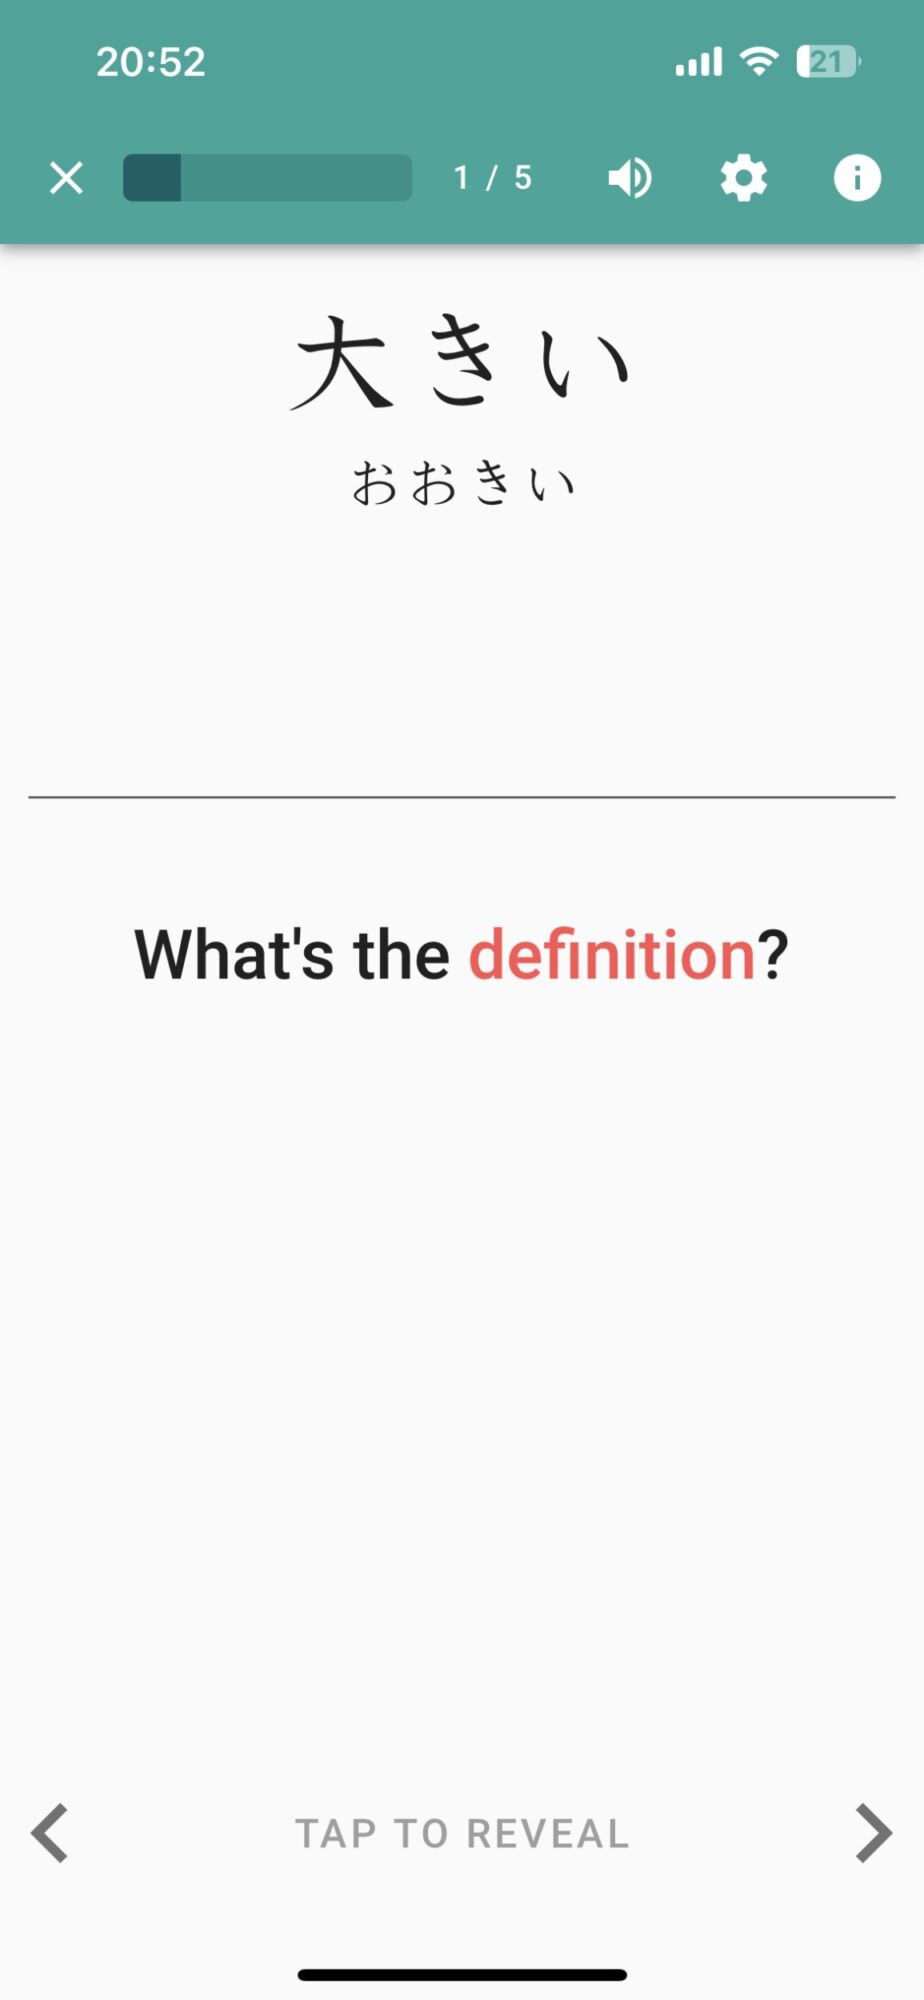 A screenshot of the definition section of a lesson in the Skritter app.